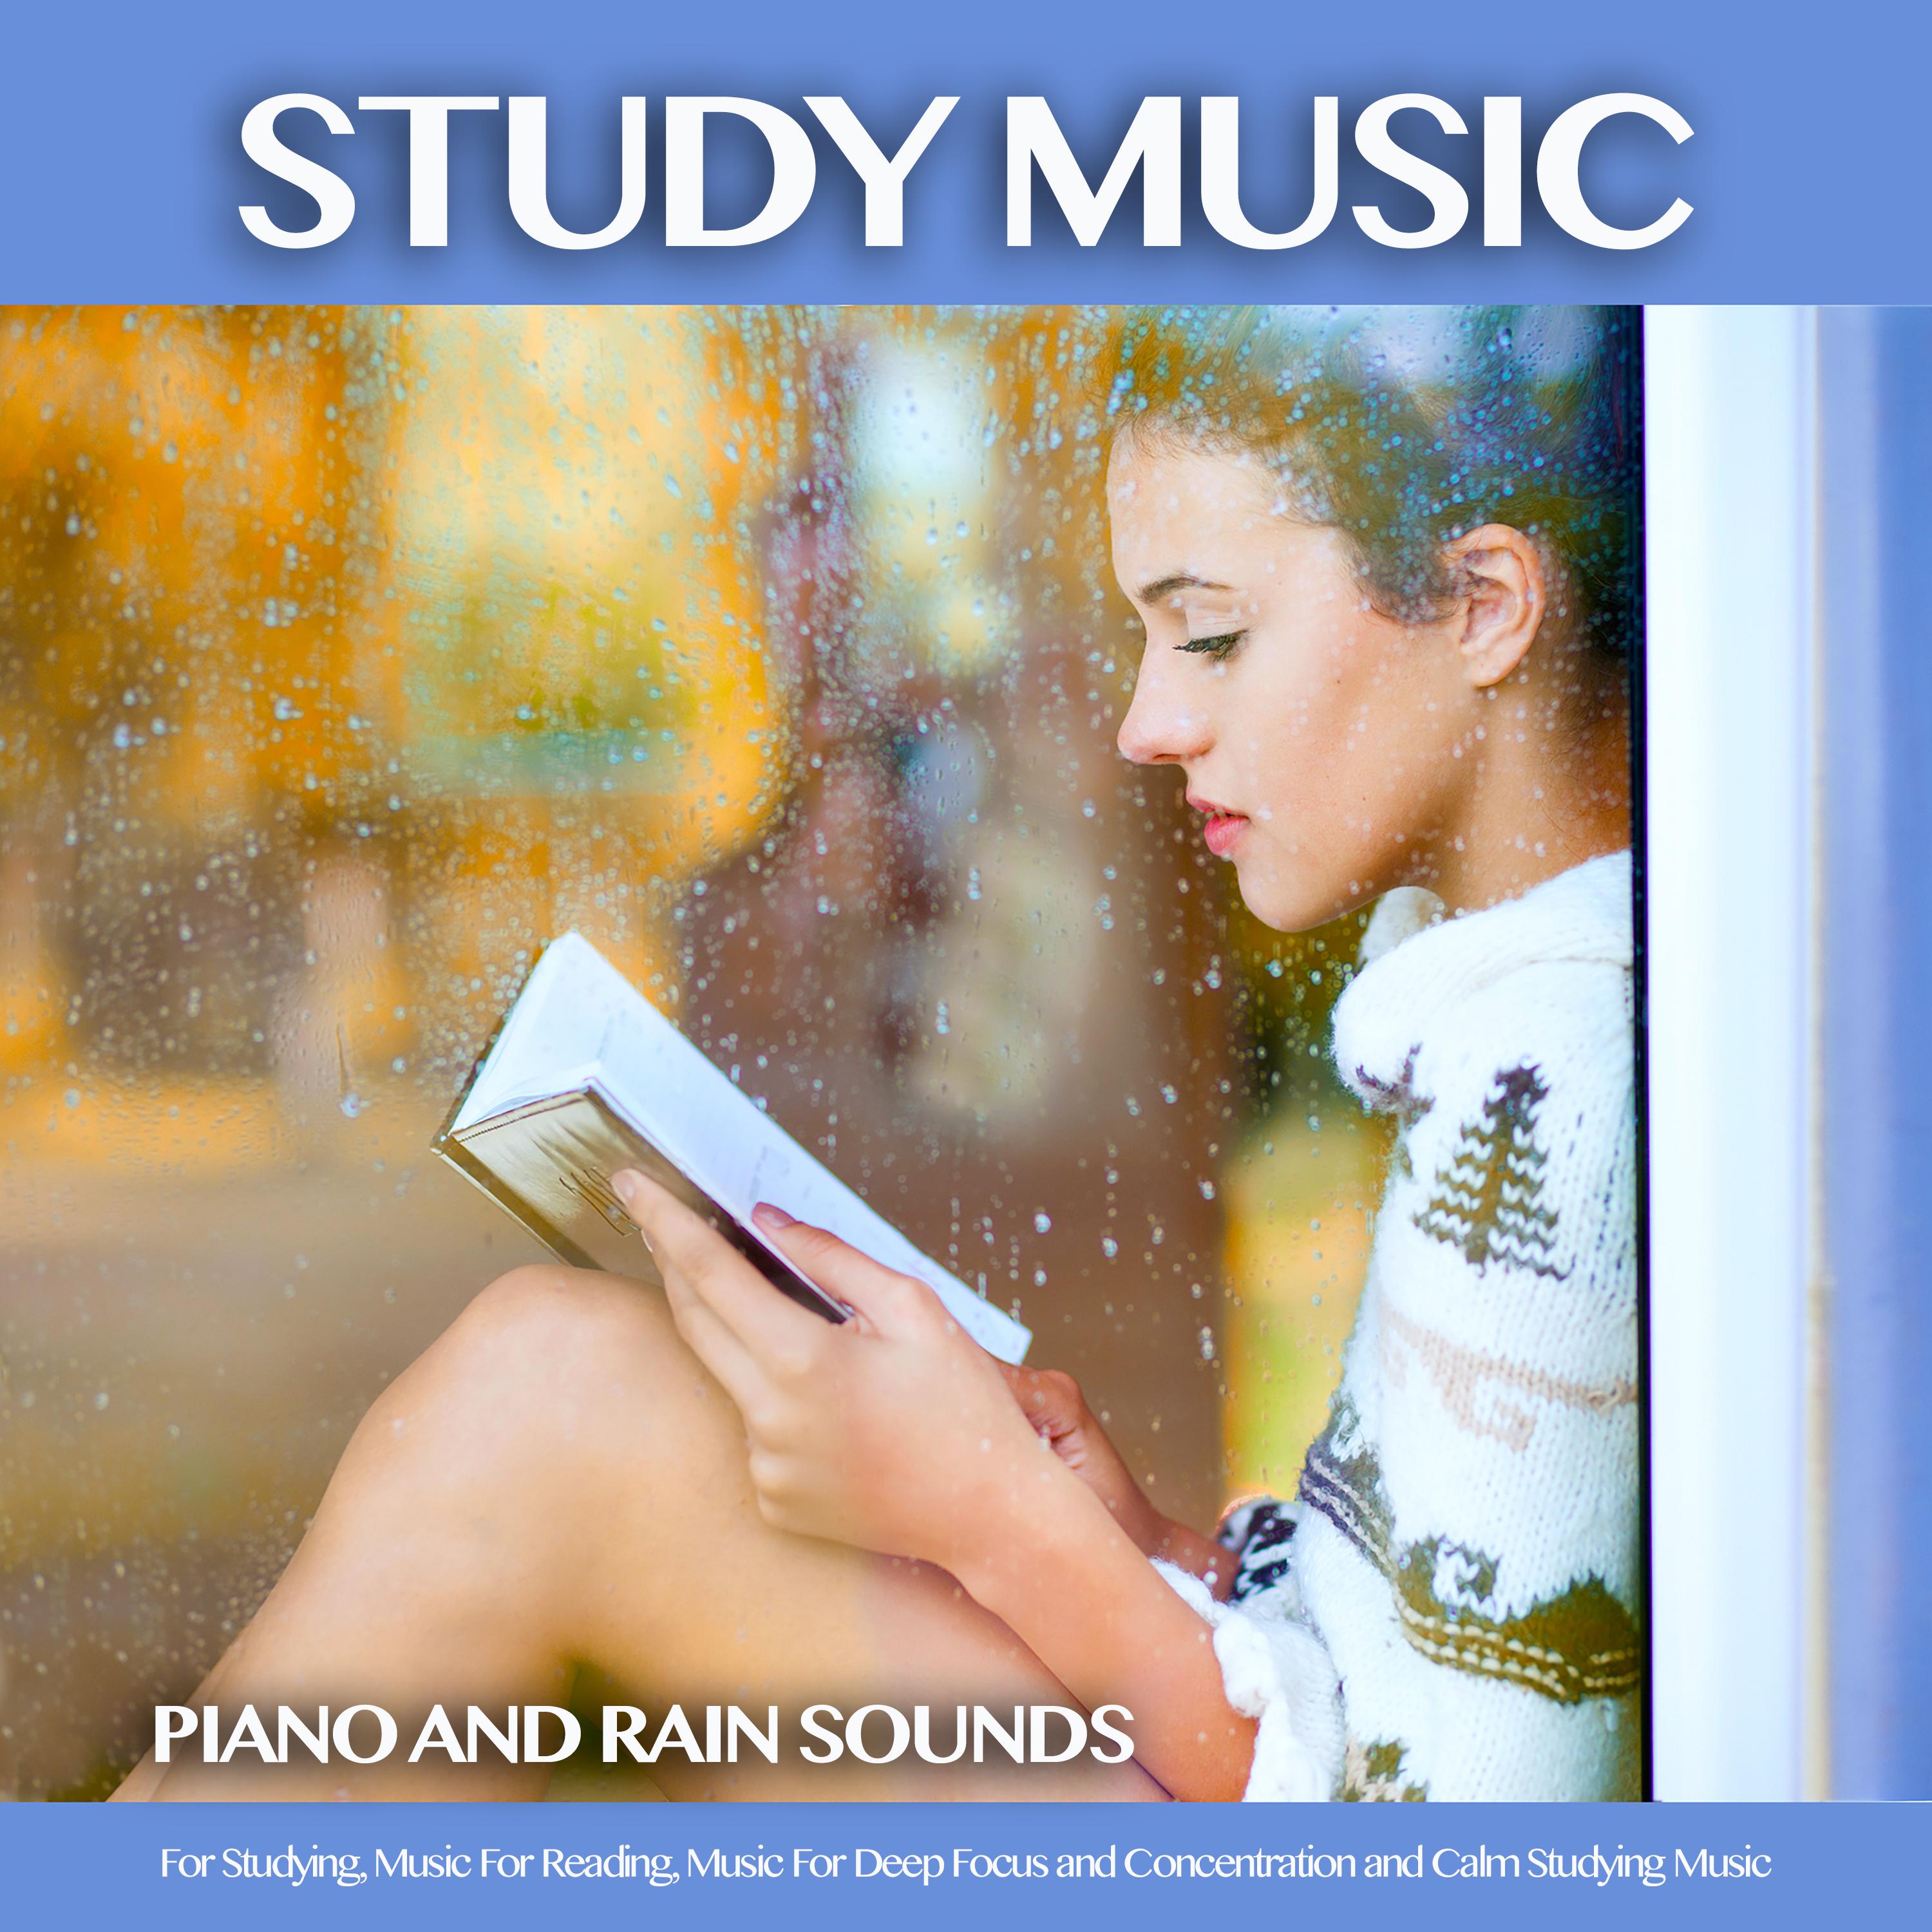 Studying Music With Rain Sounds